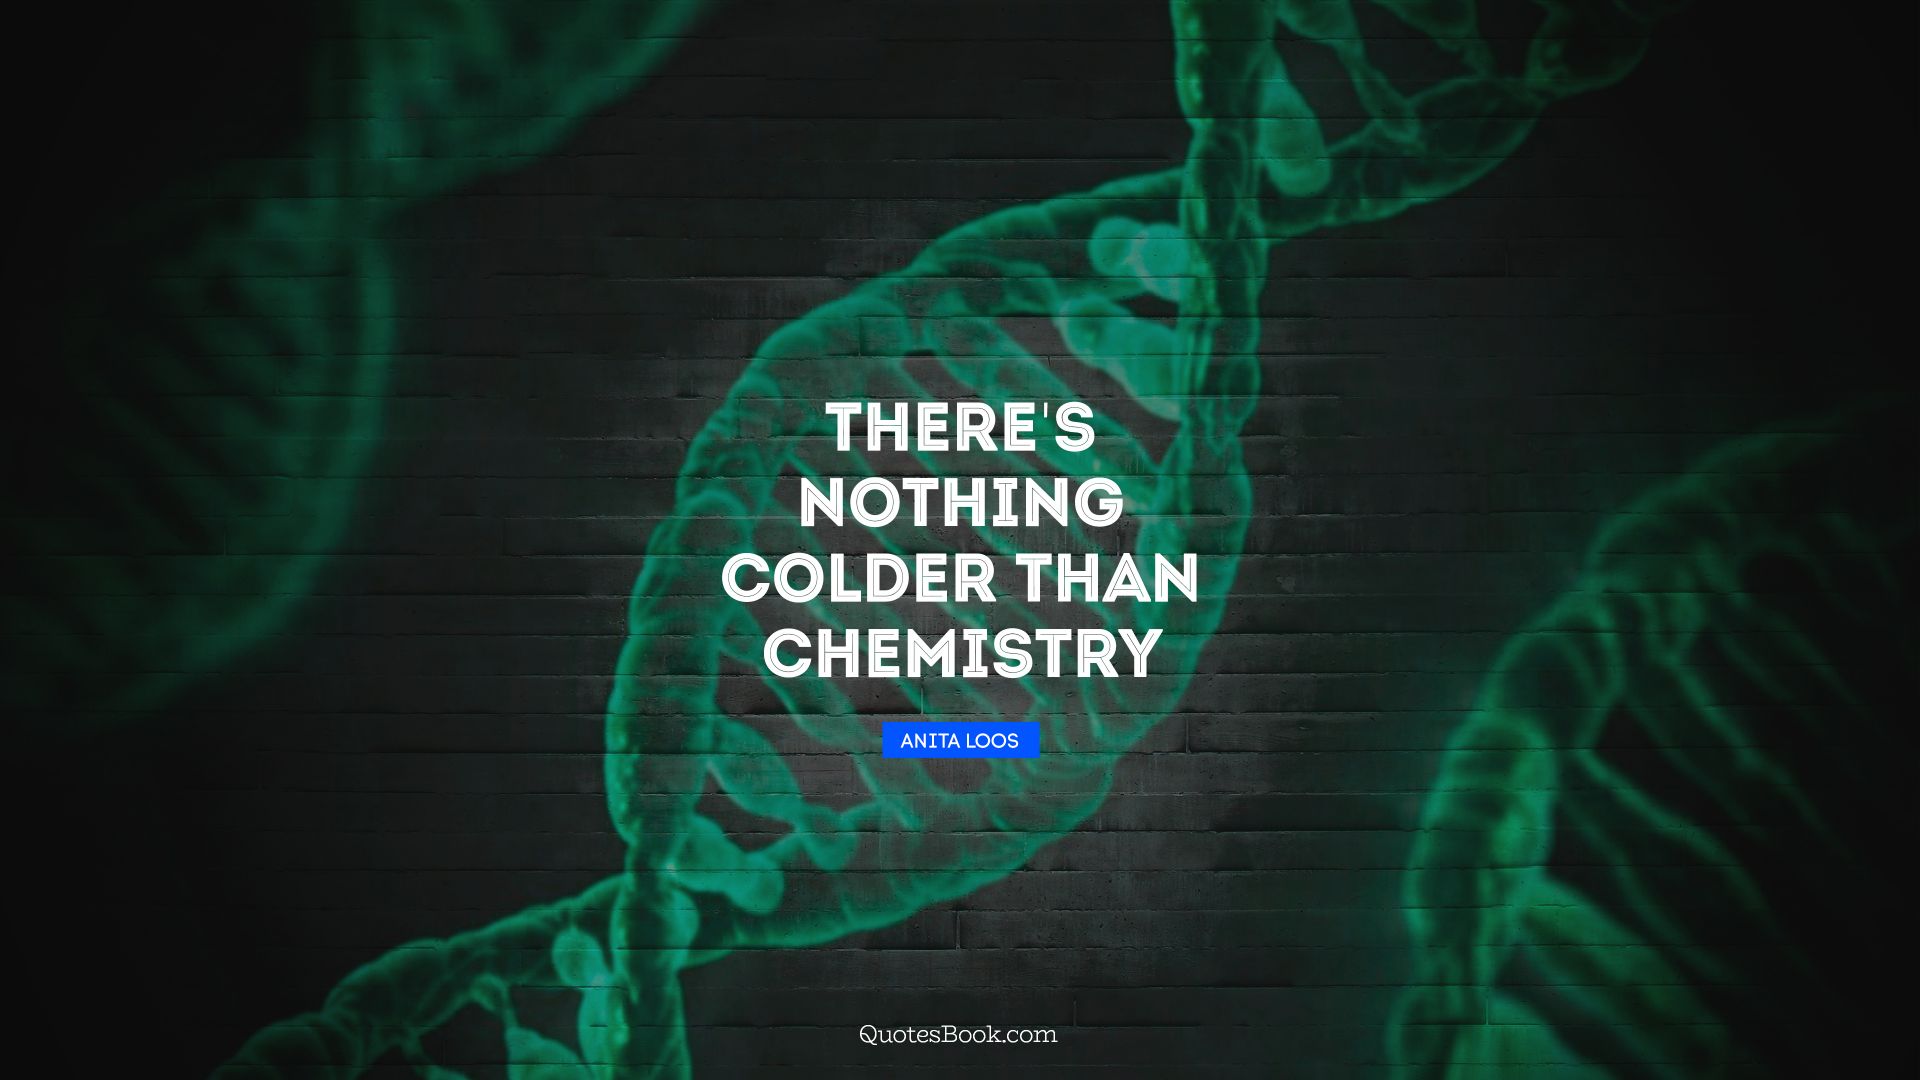 There's nothing colder than chemistry. - Quote by Anita Loos